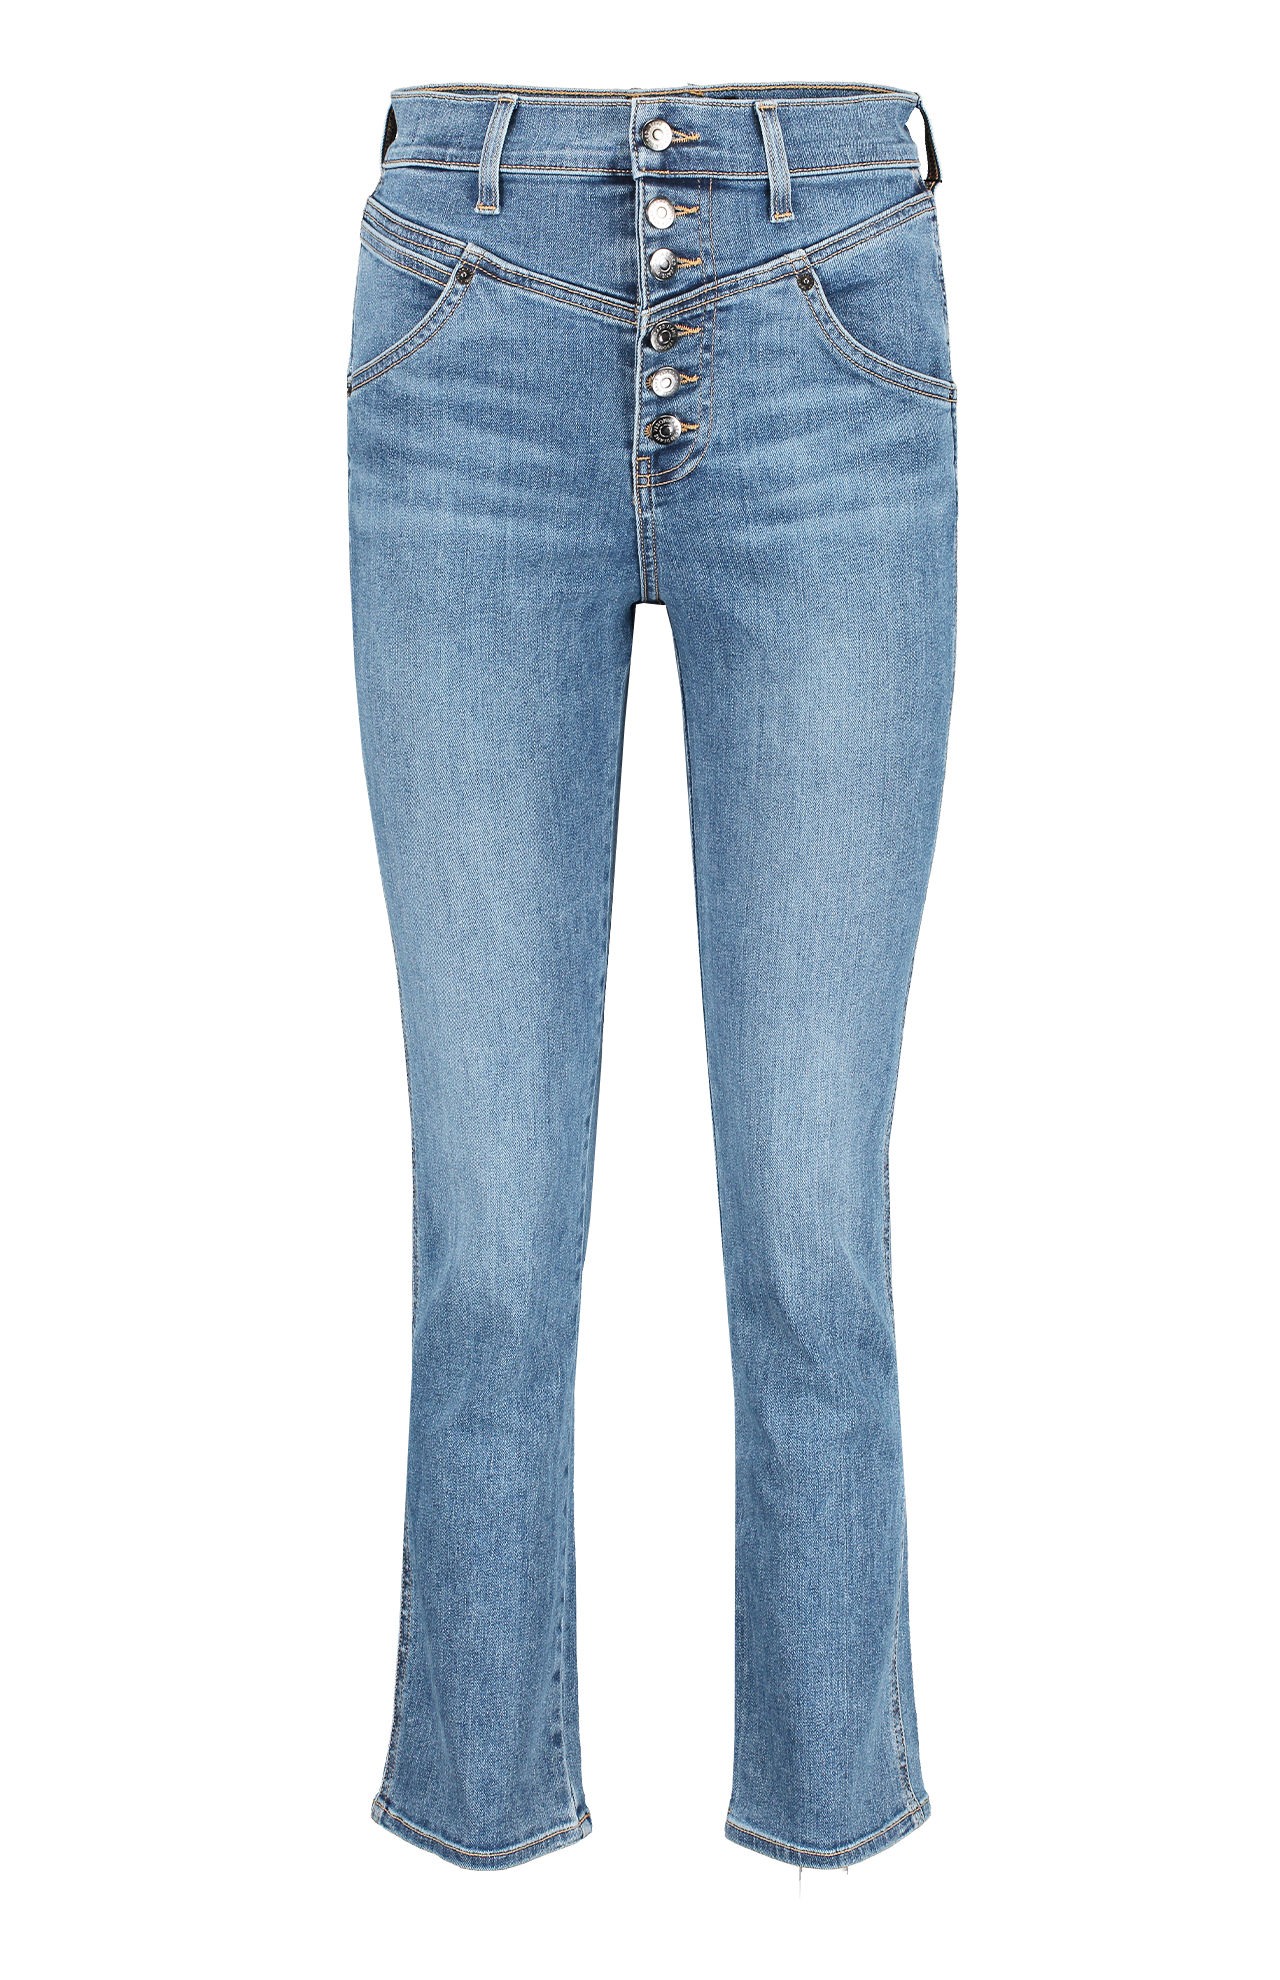 Ryleigh Front Yoke Jeans (6945213382771)